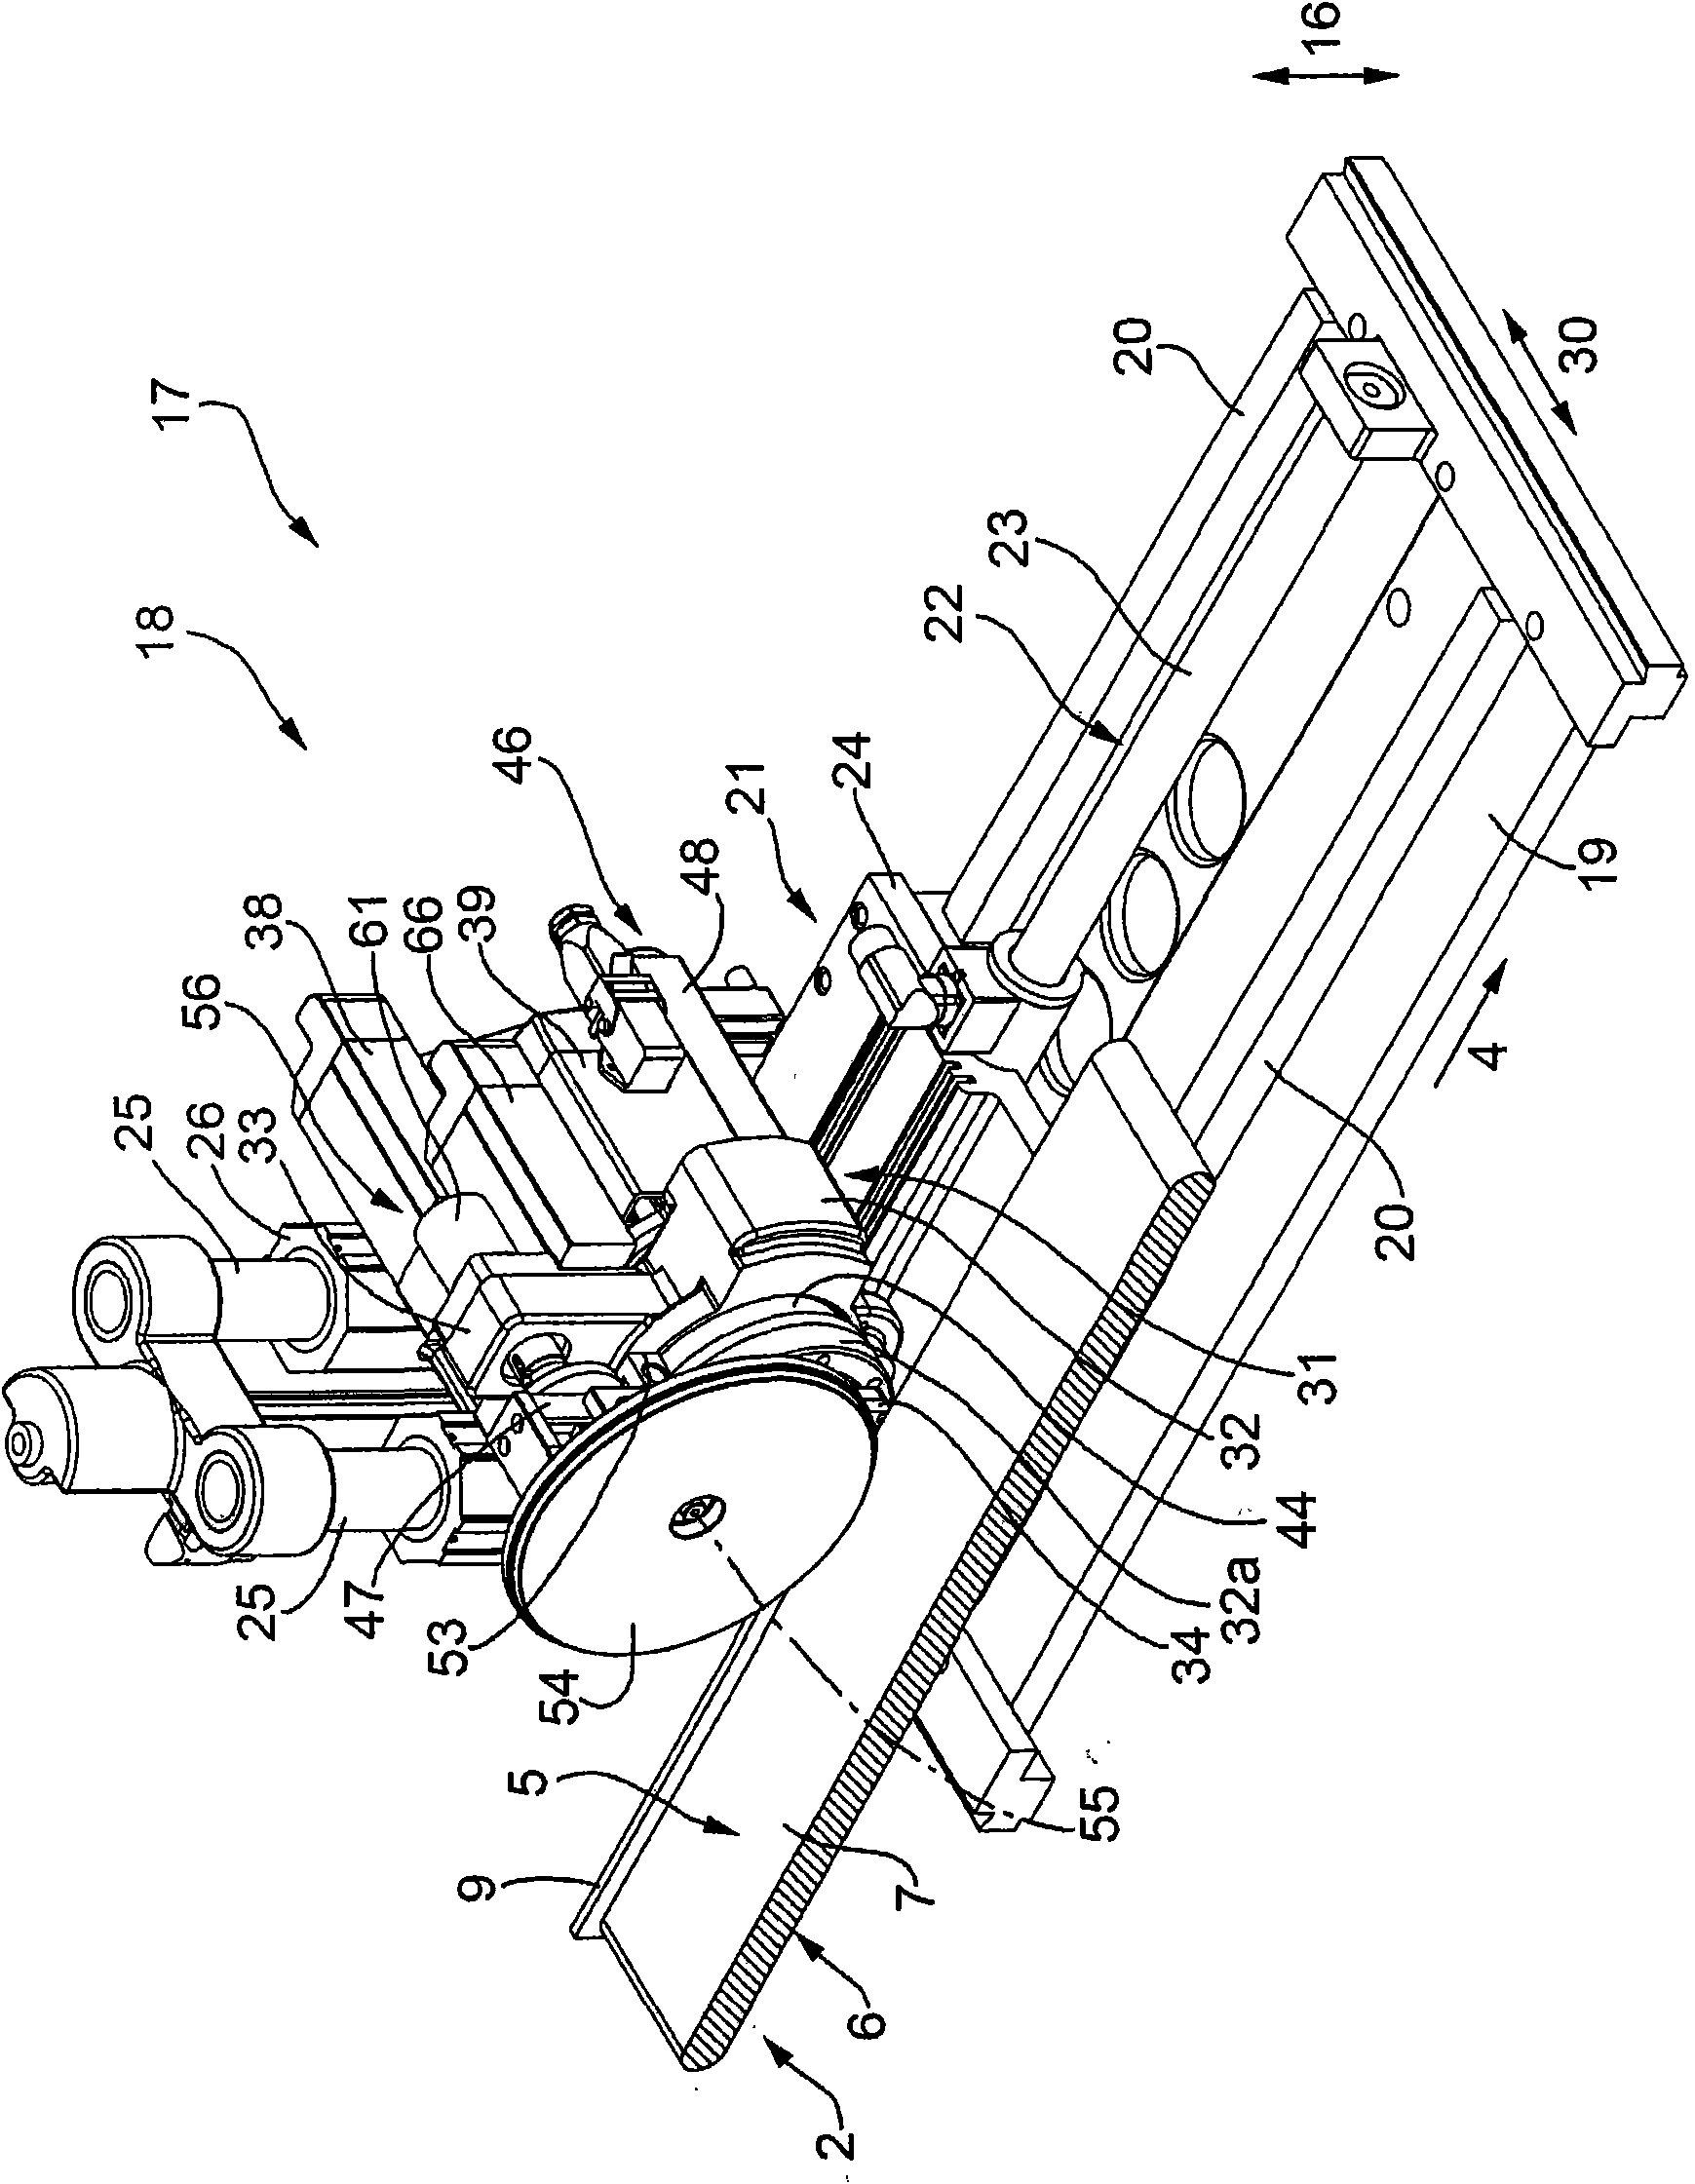 Working unit for processing of wooden boards and the like